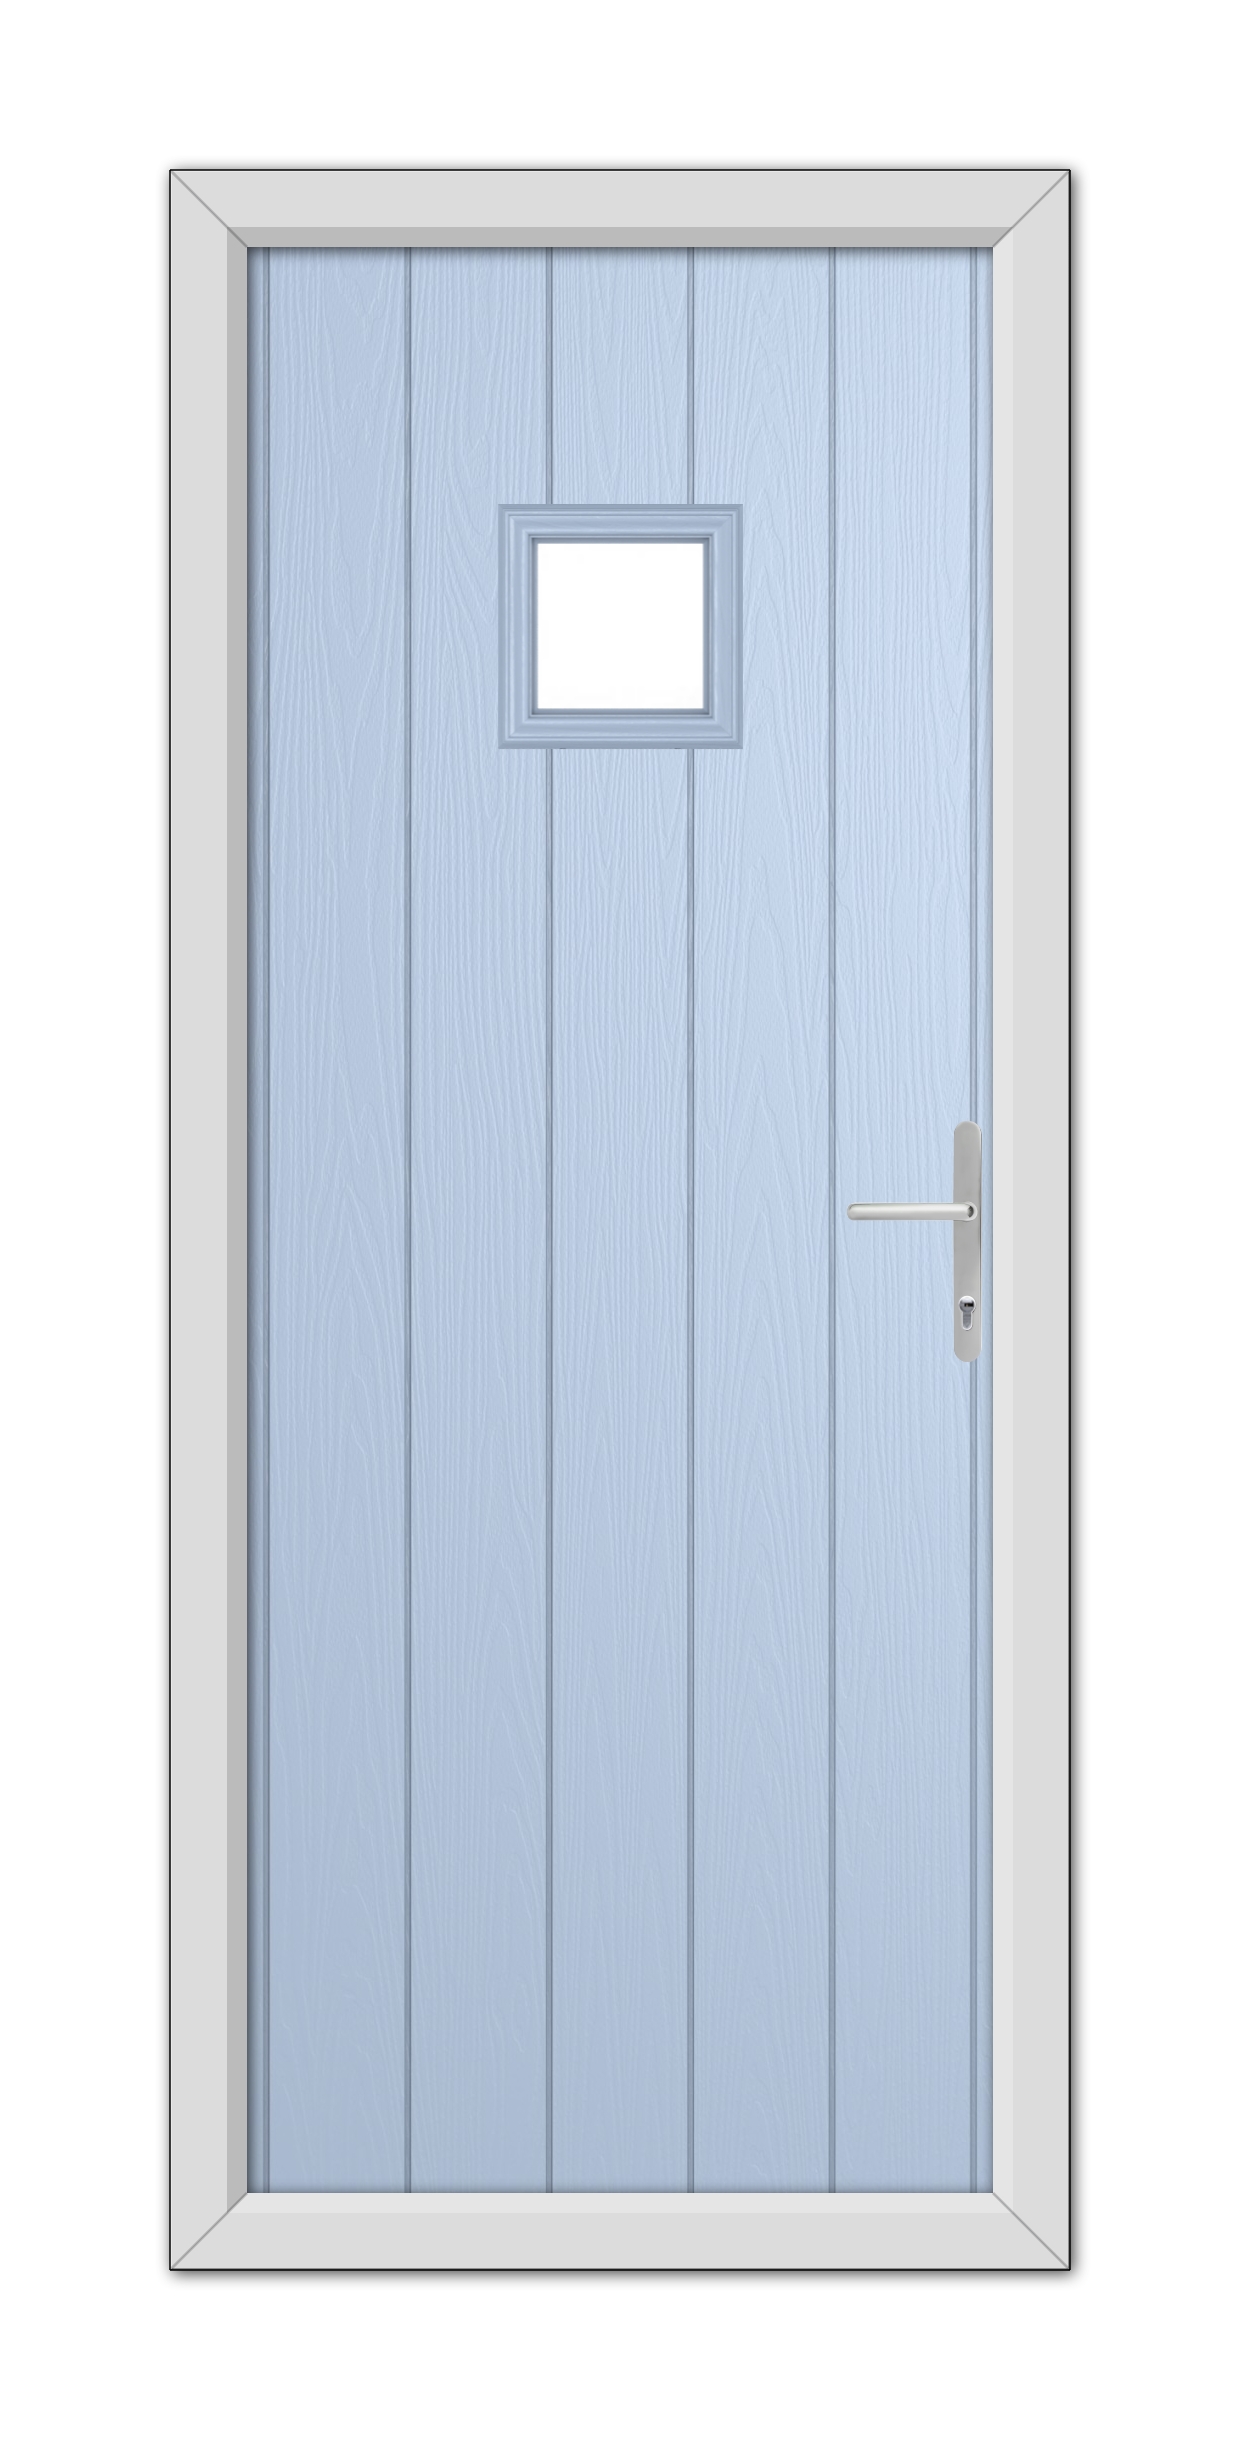 A Duck Egg Blue Brampton Composite Door 48mm Timber Core with a small rectangular window and a silver handle, set within a white frame.